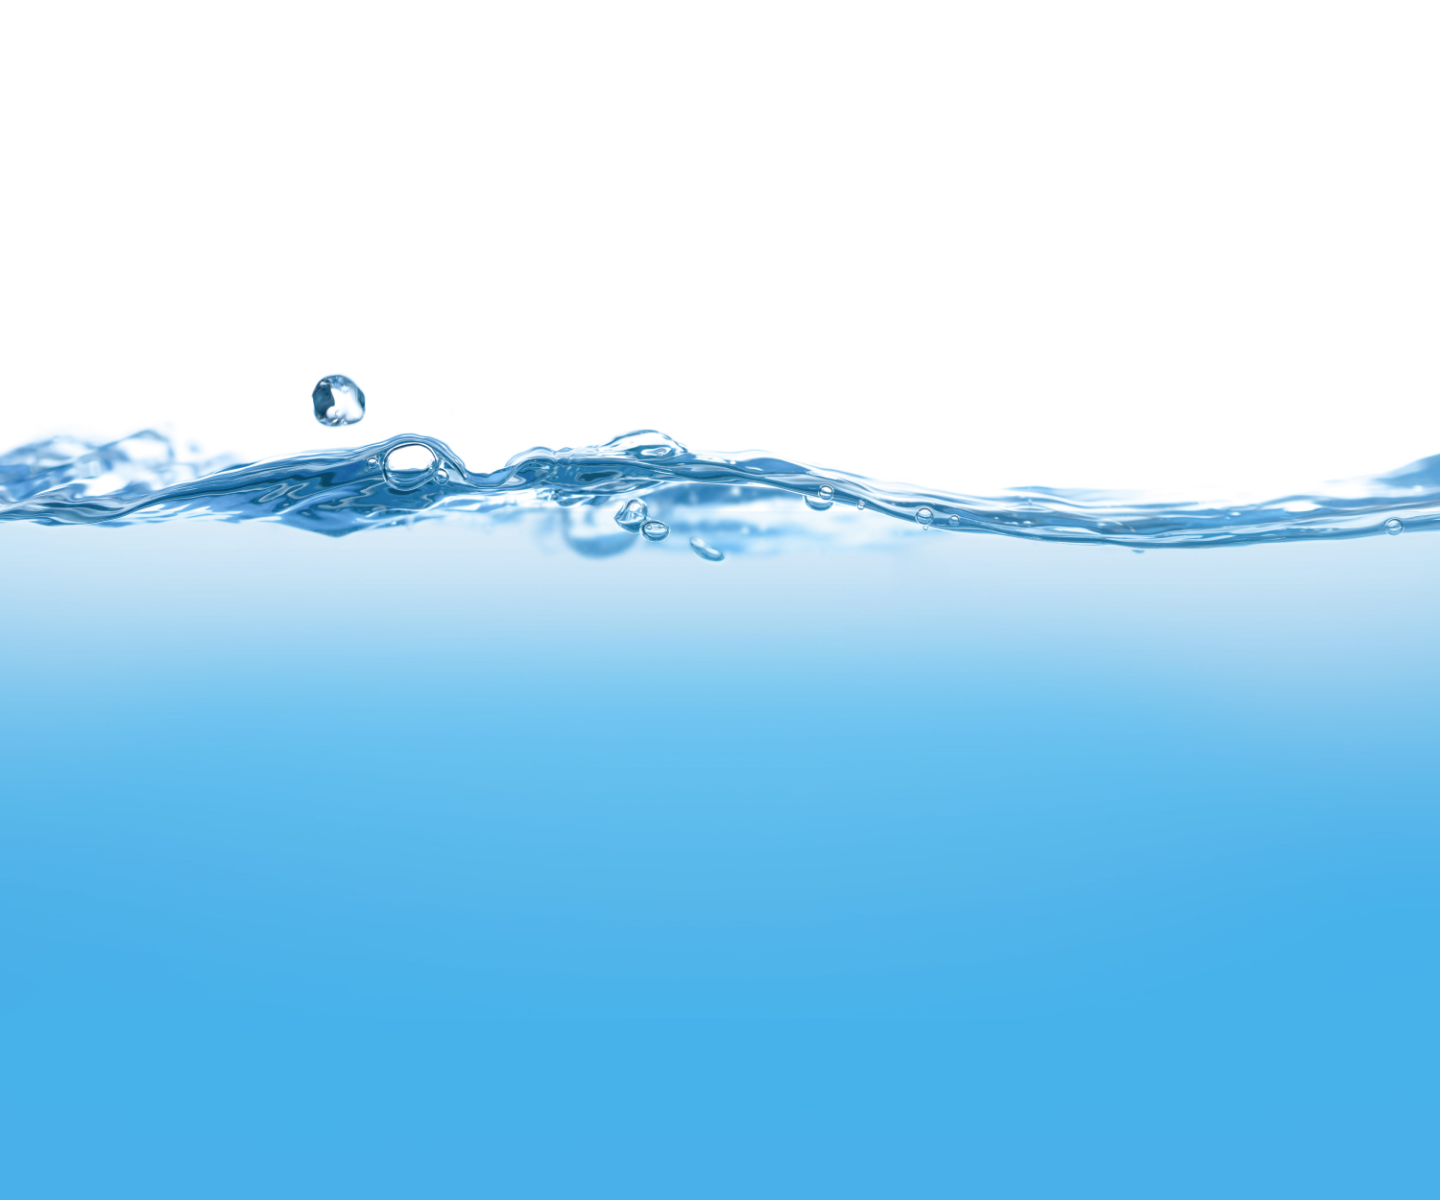 Water filling up a blue background